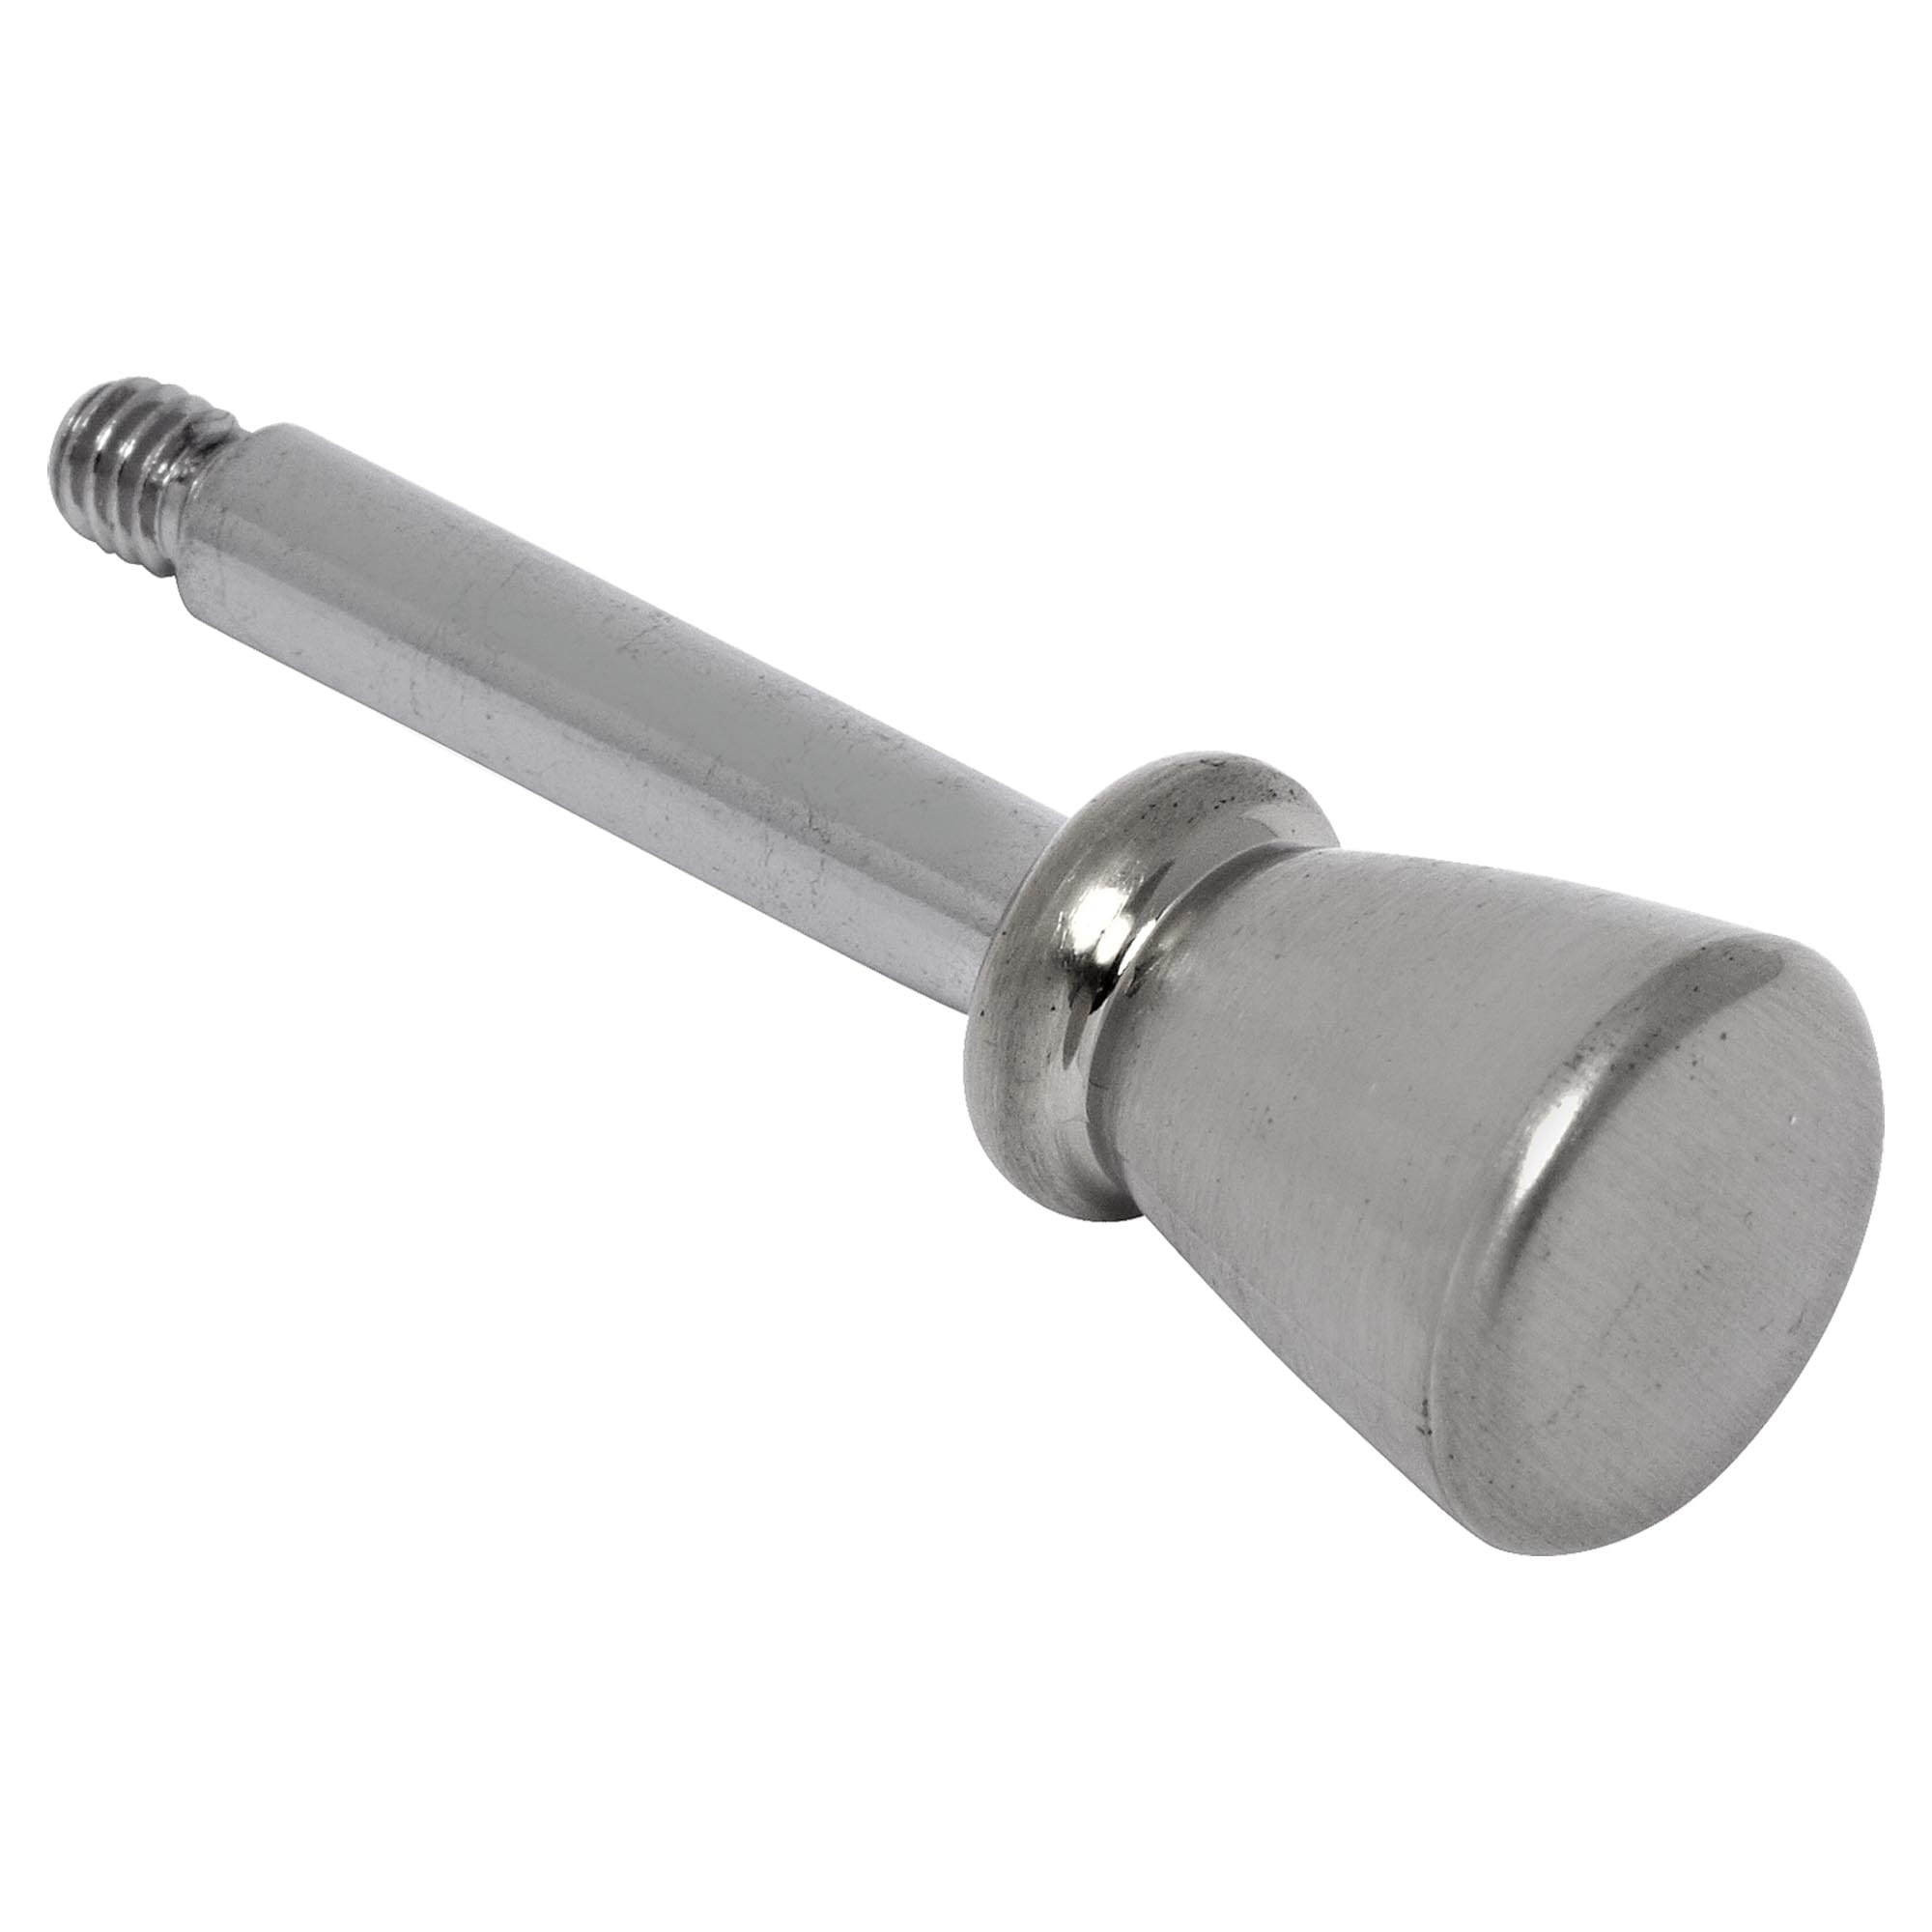 Knob For Drain 7164Sf Rp   BRUSHED NICKEL